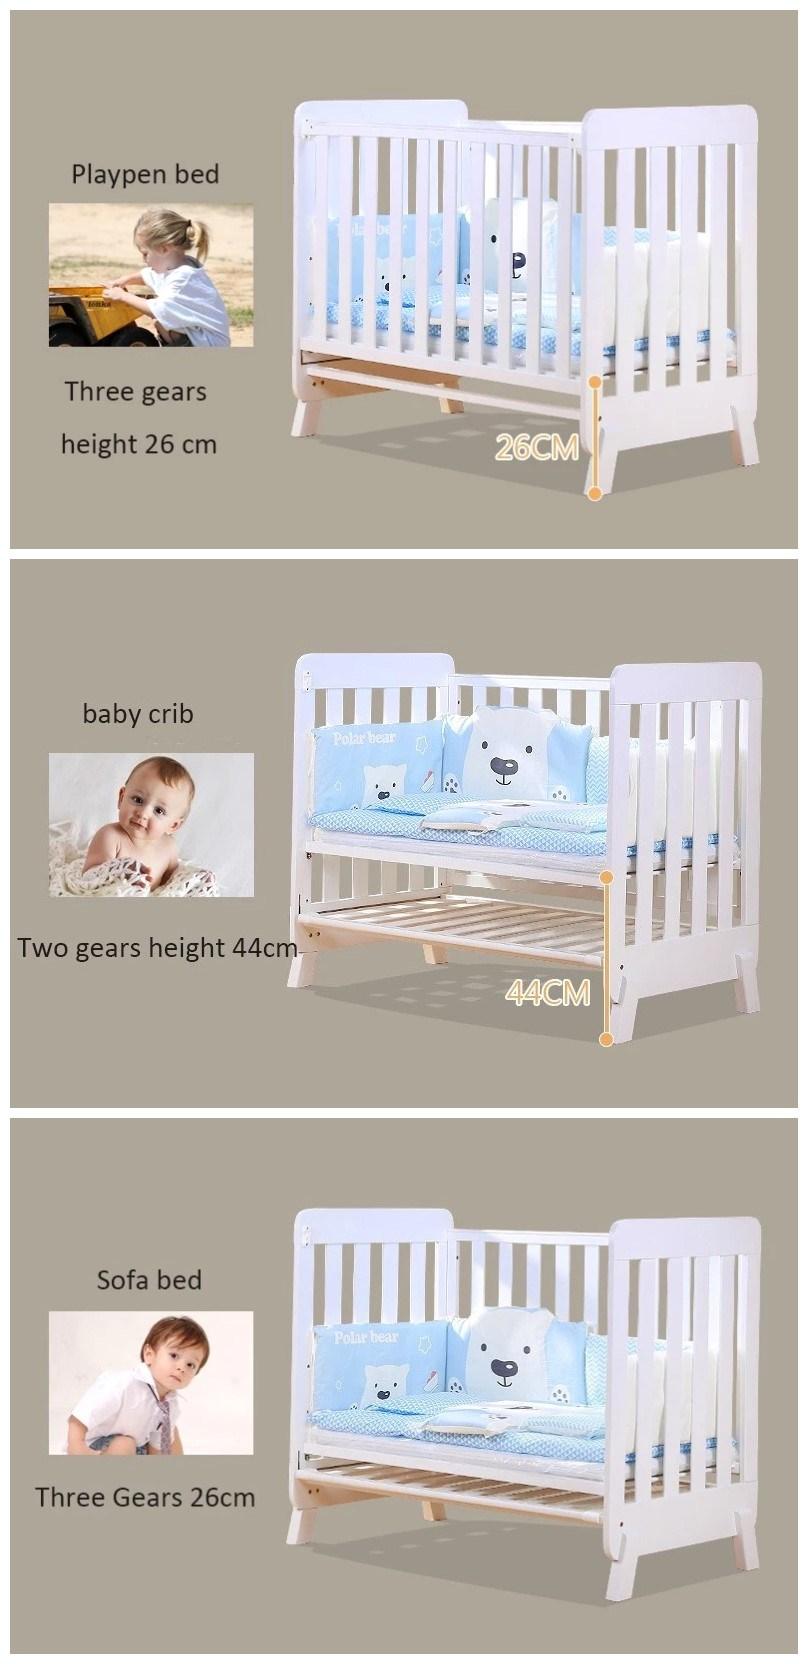 Convertible 0-4 Years Baby Cot Toddler Bed Multifunctional Kids Crib Solid Wooden Daybed